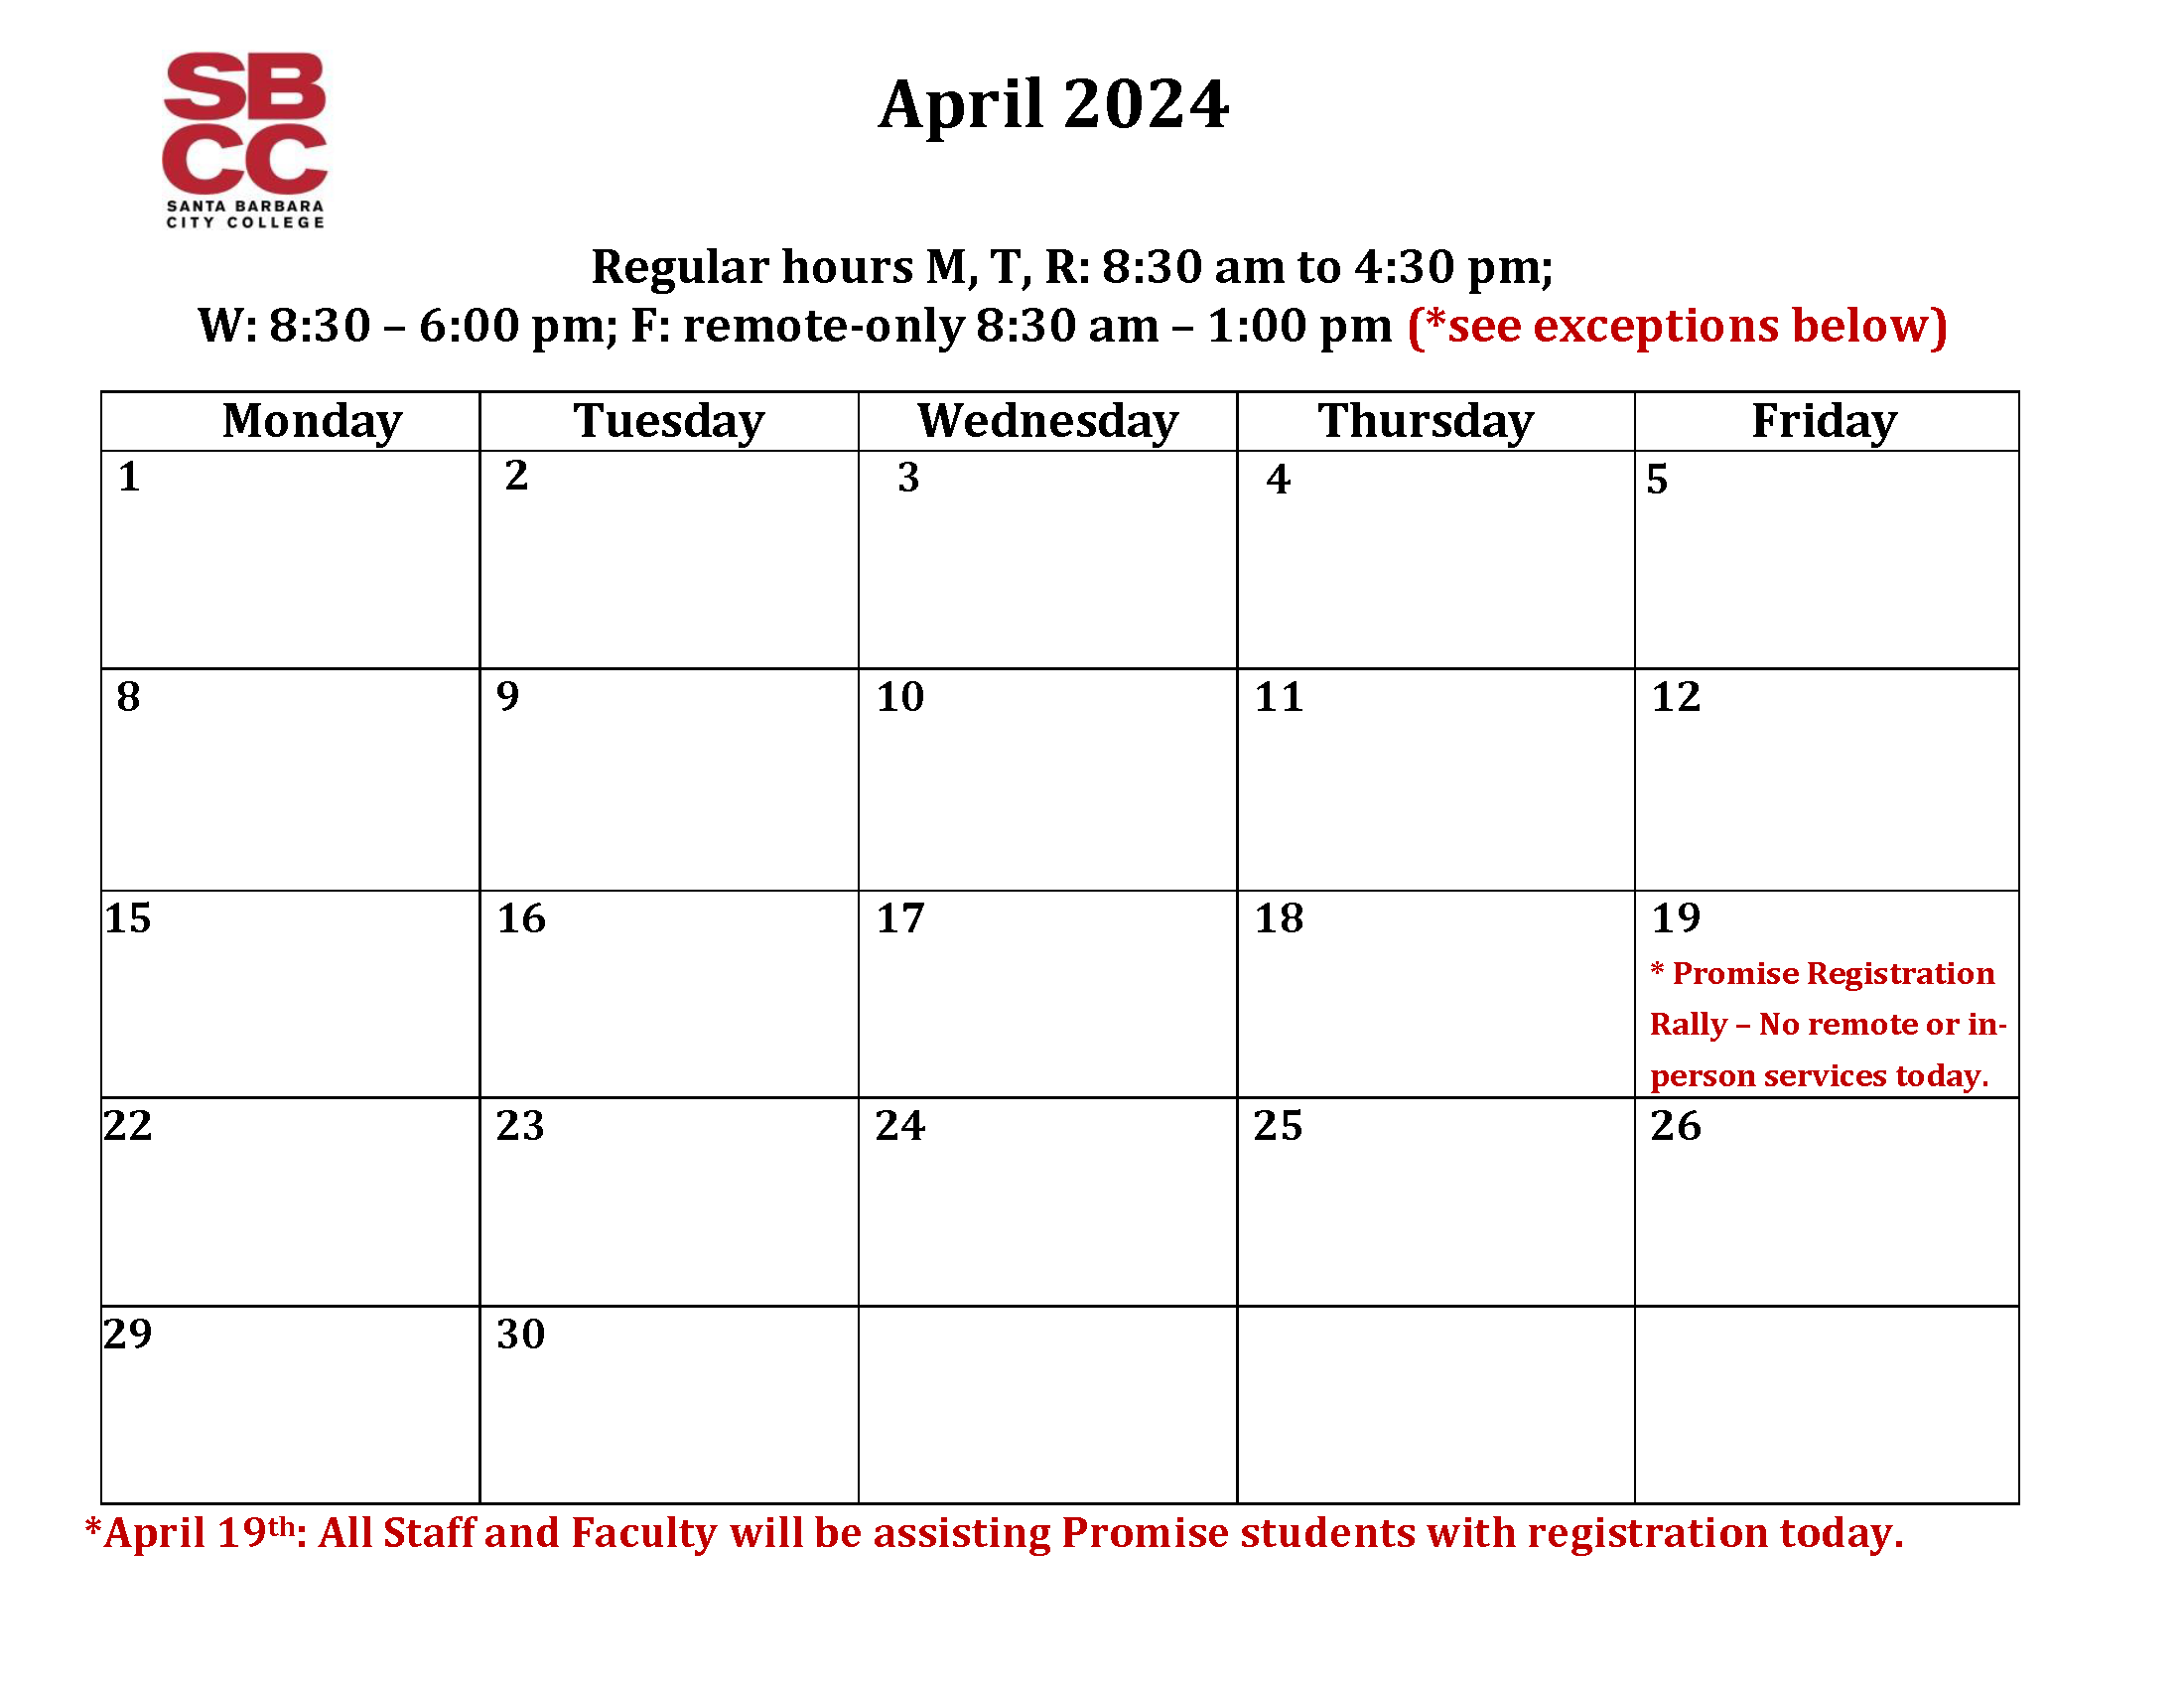 April 2024 student services hours - click for PDF